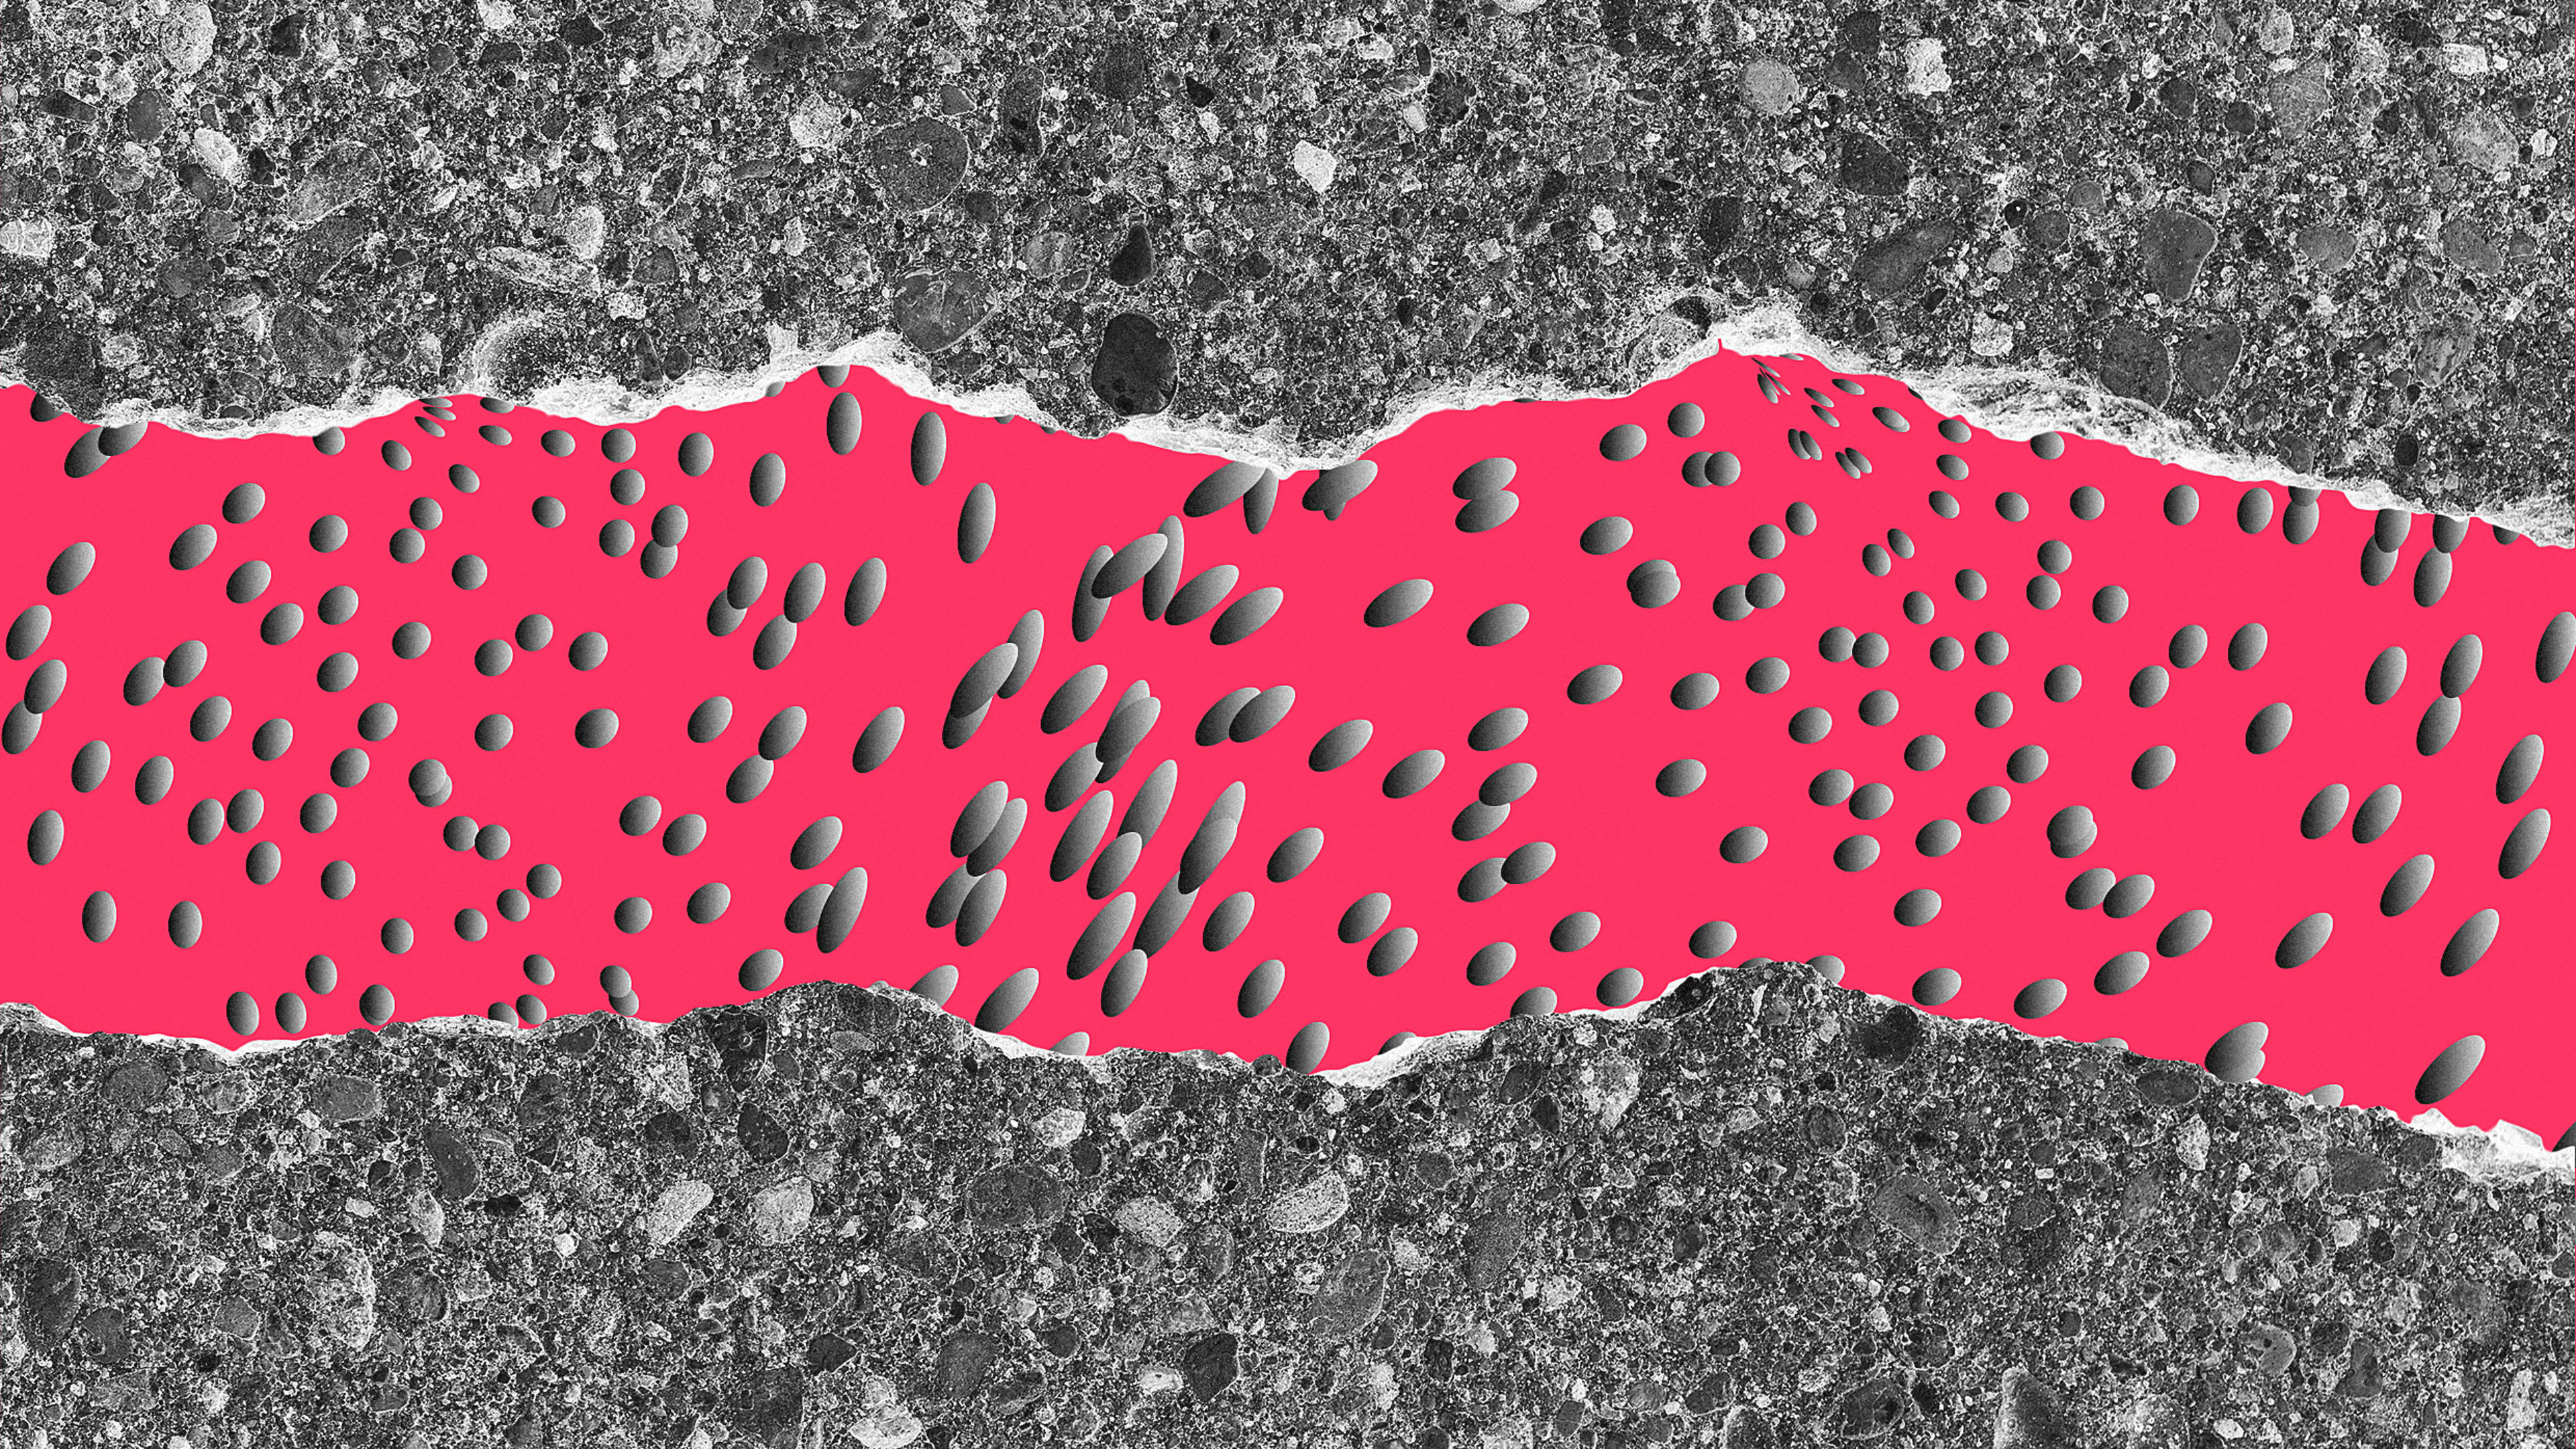 This self-healing concrete automatically fills in cracks